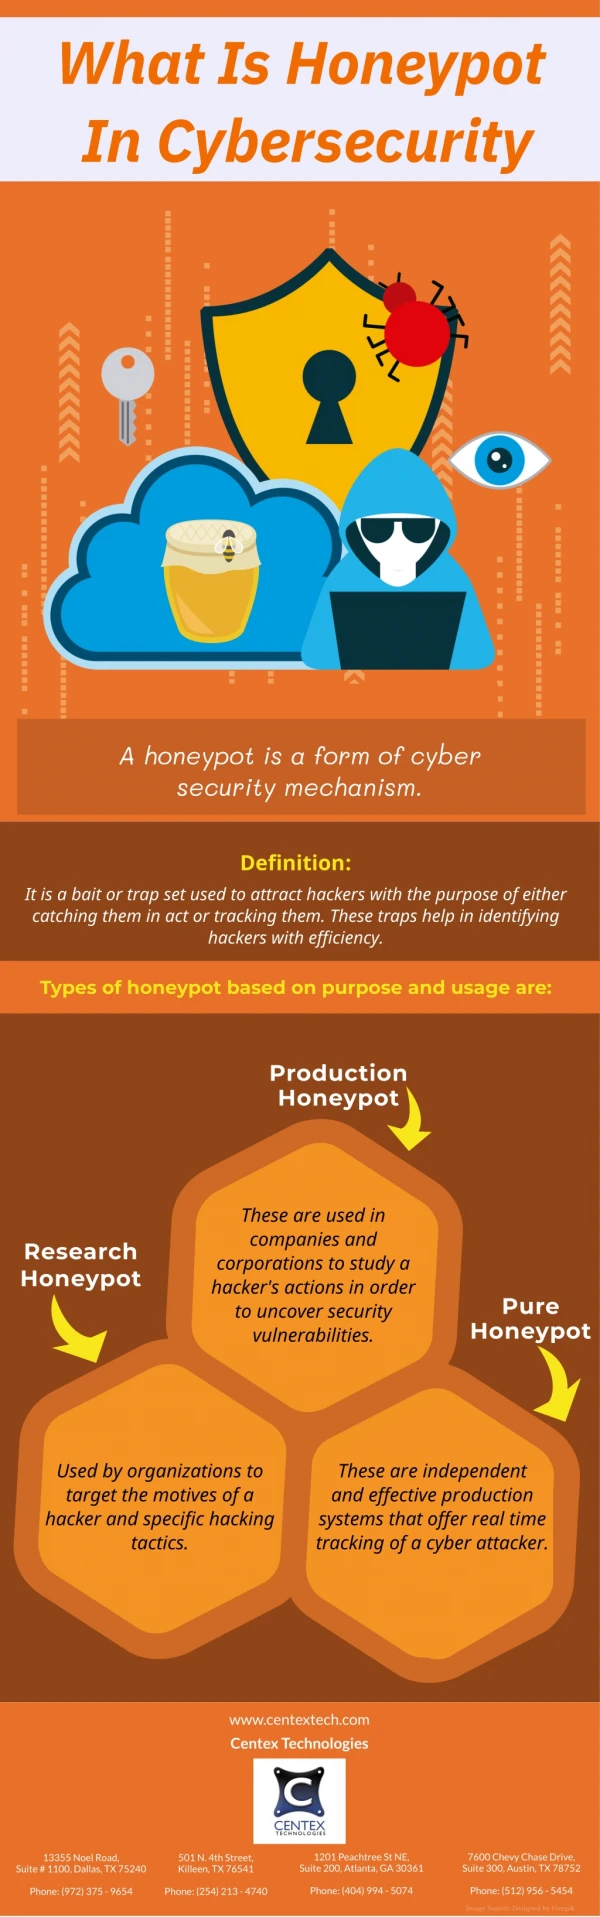 What Is Honeypot In Cybersecurity